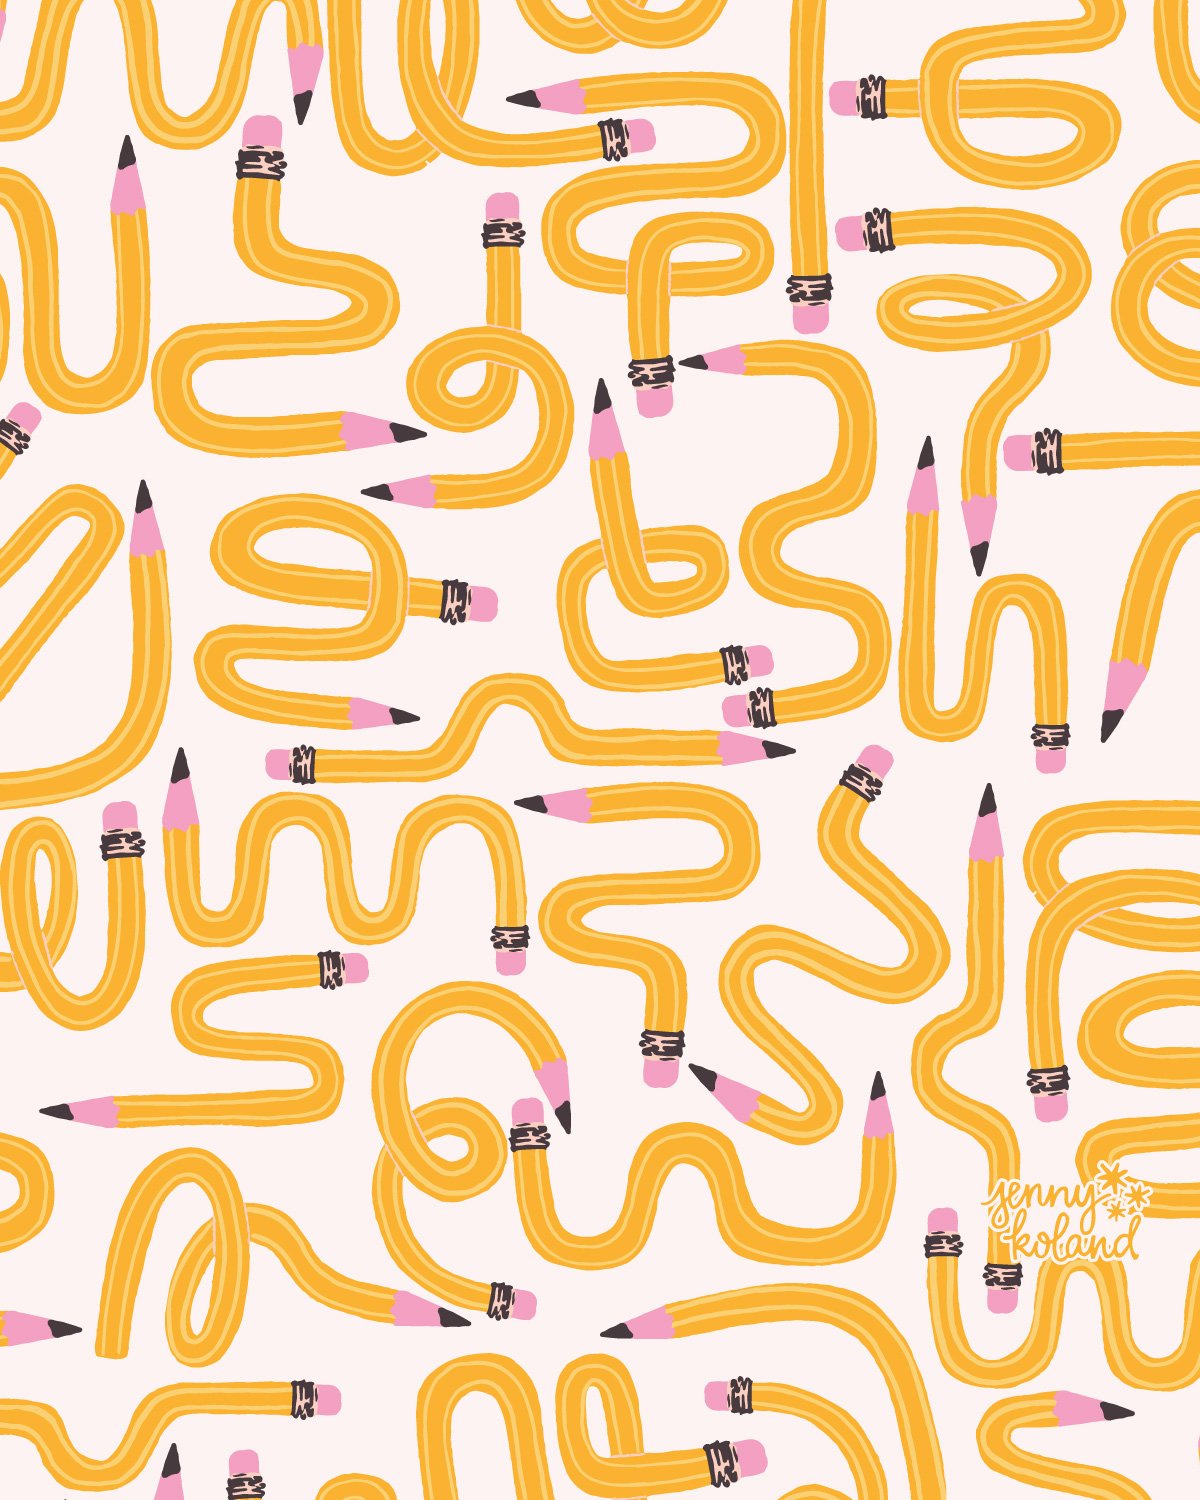 Monday vibes 💛 ✏️ 💛 ✏️ 💛 

I loved making these twisty pencils and can't wait to see them in action! They are available as part of my School Days collection on @spoonflower and also available for licensing

#pencilpattern #backtoschoolpattern #sch